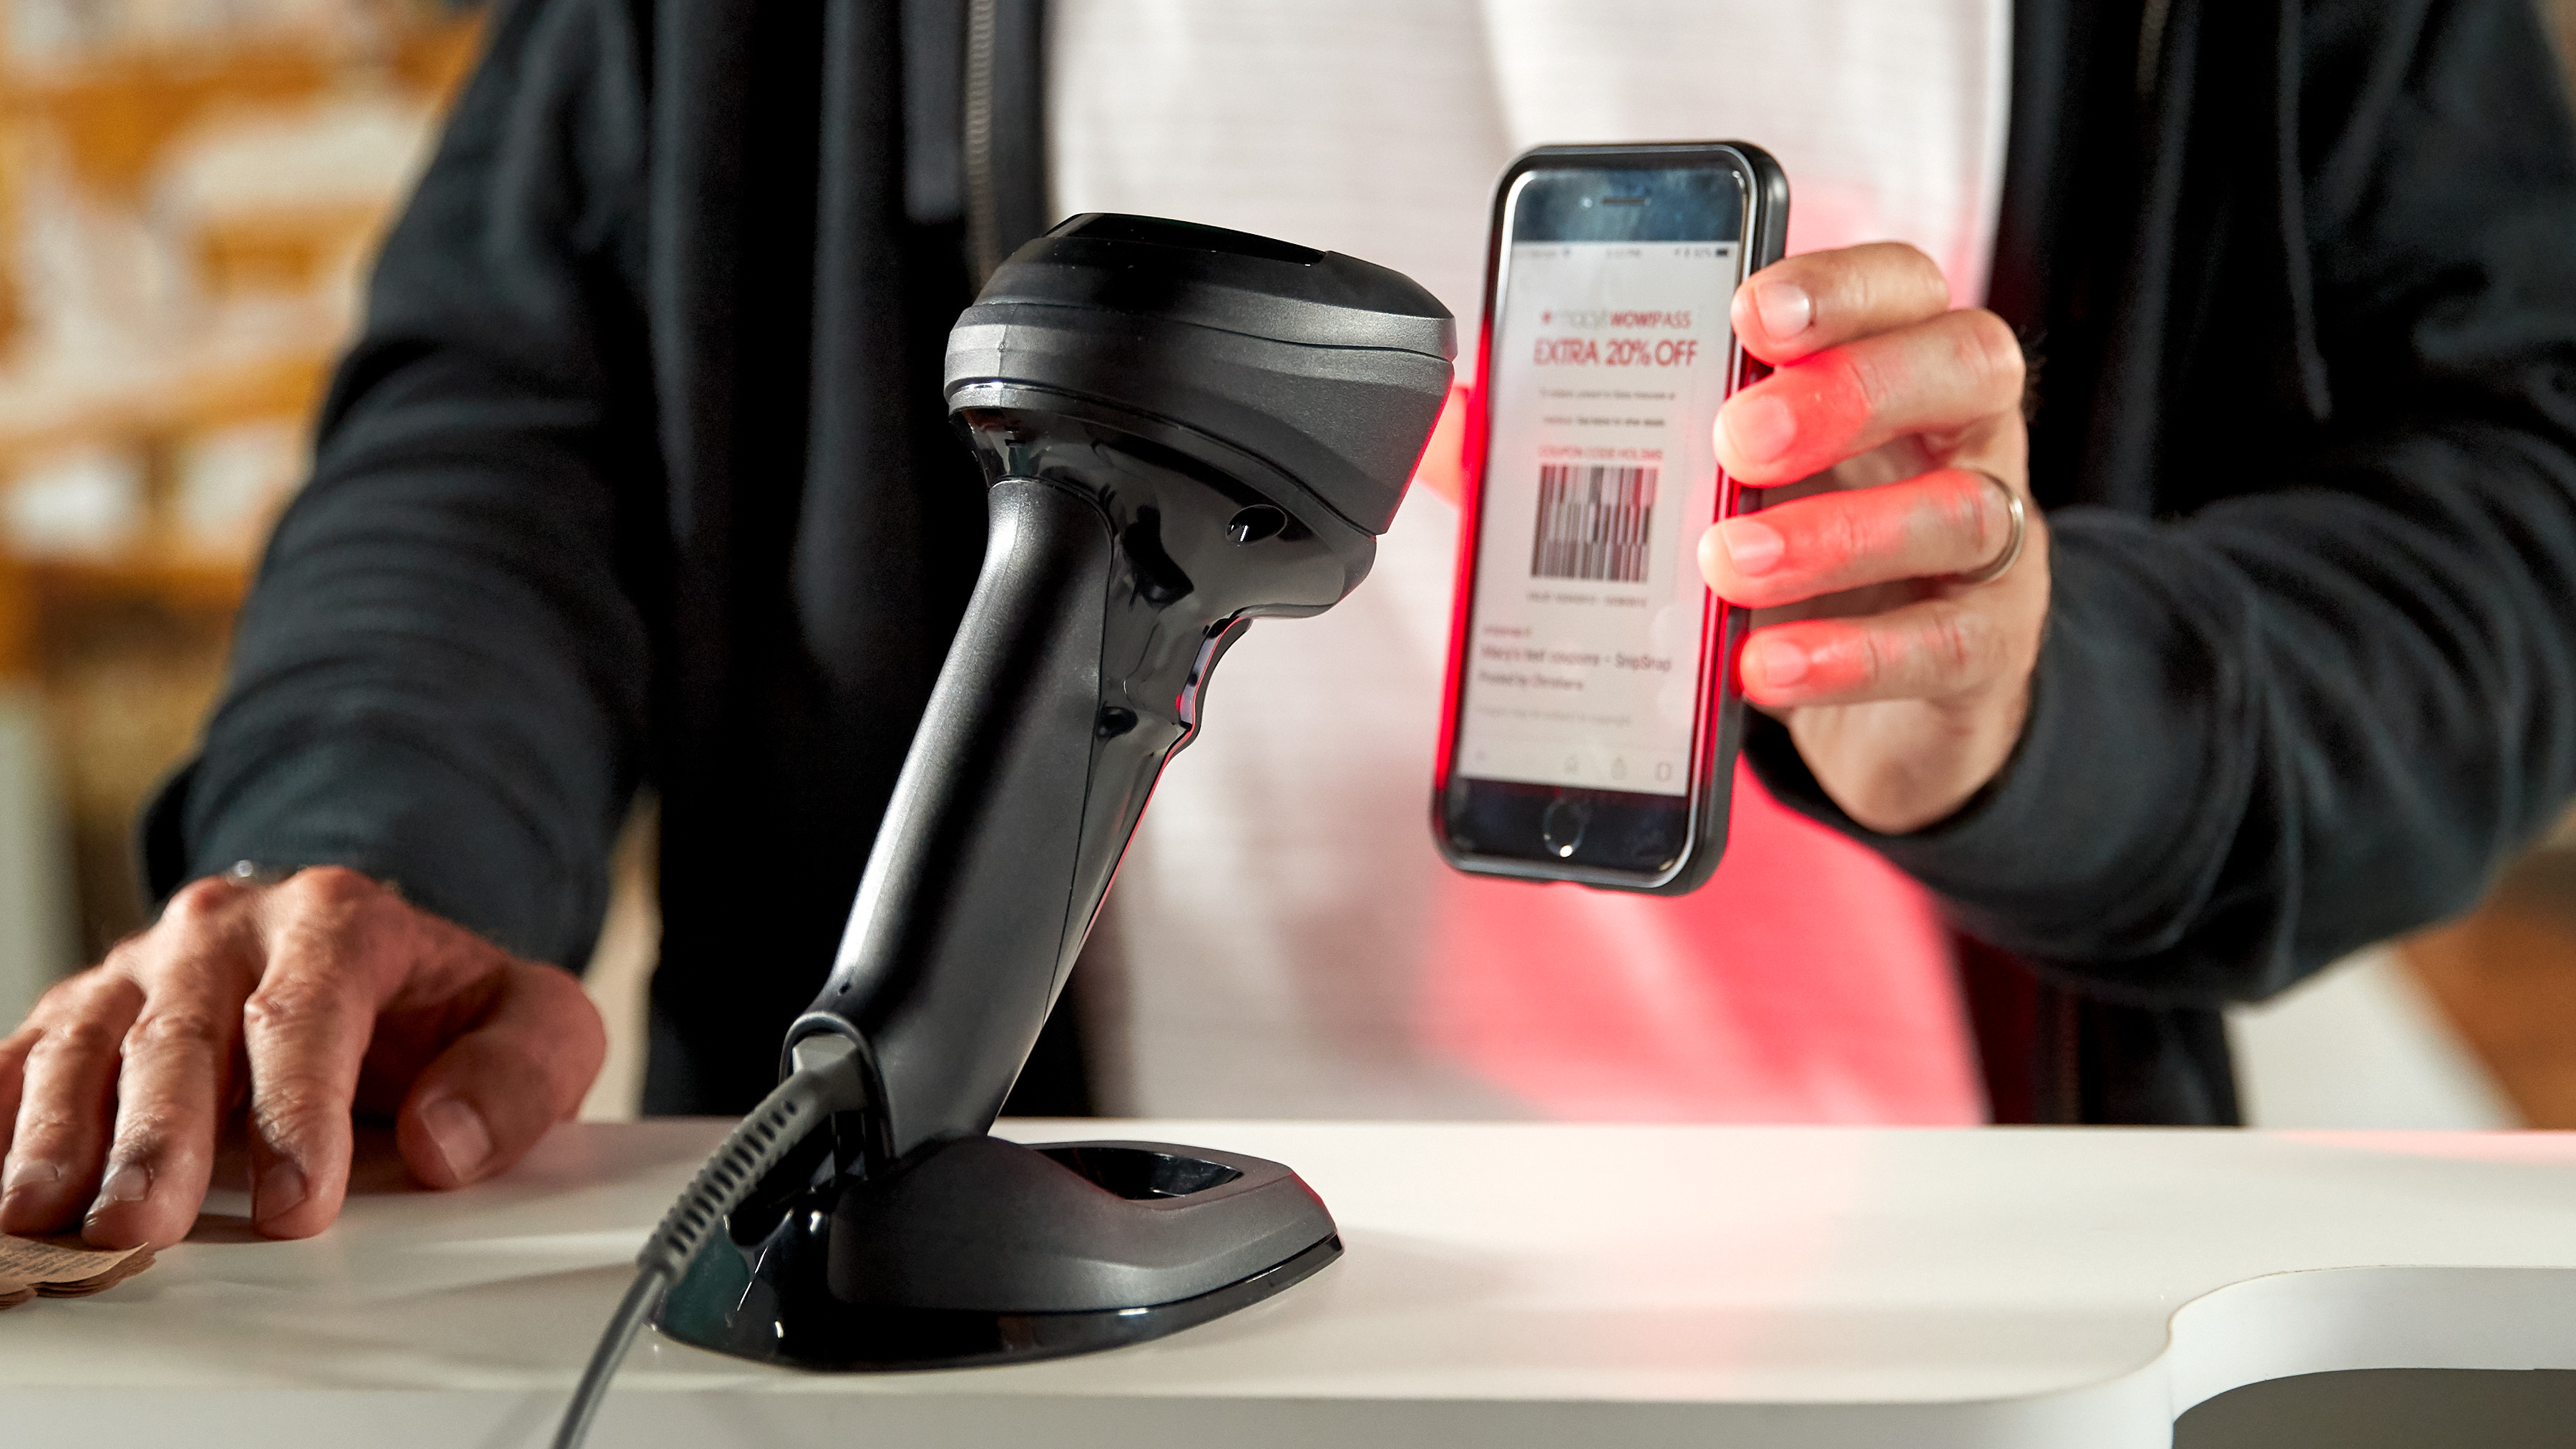 A Zebra scanner scanning a barcode on a mobile device.